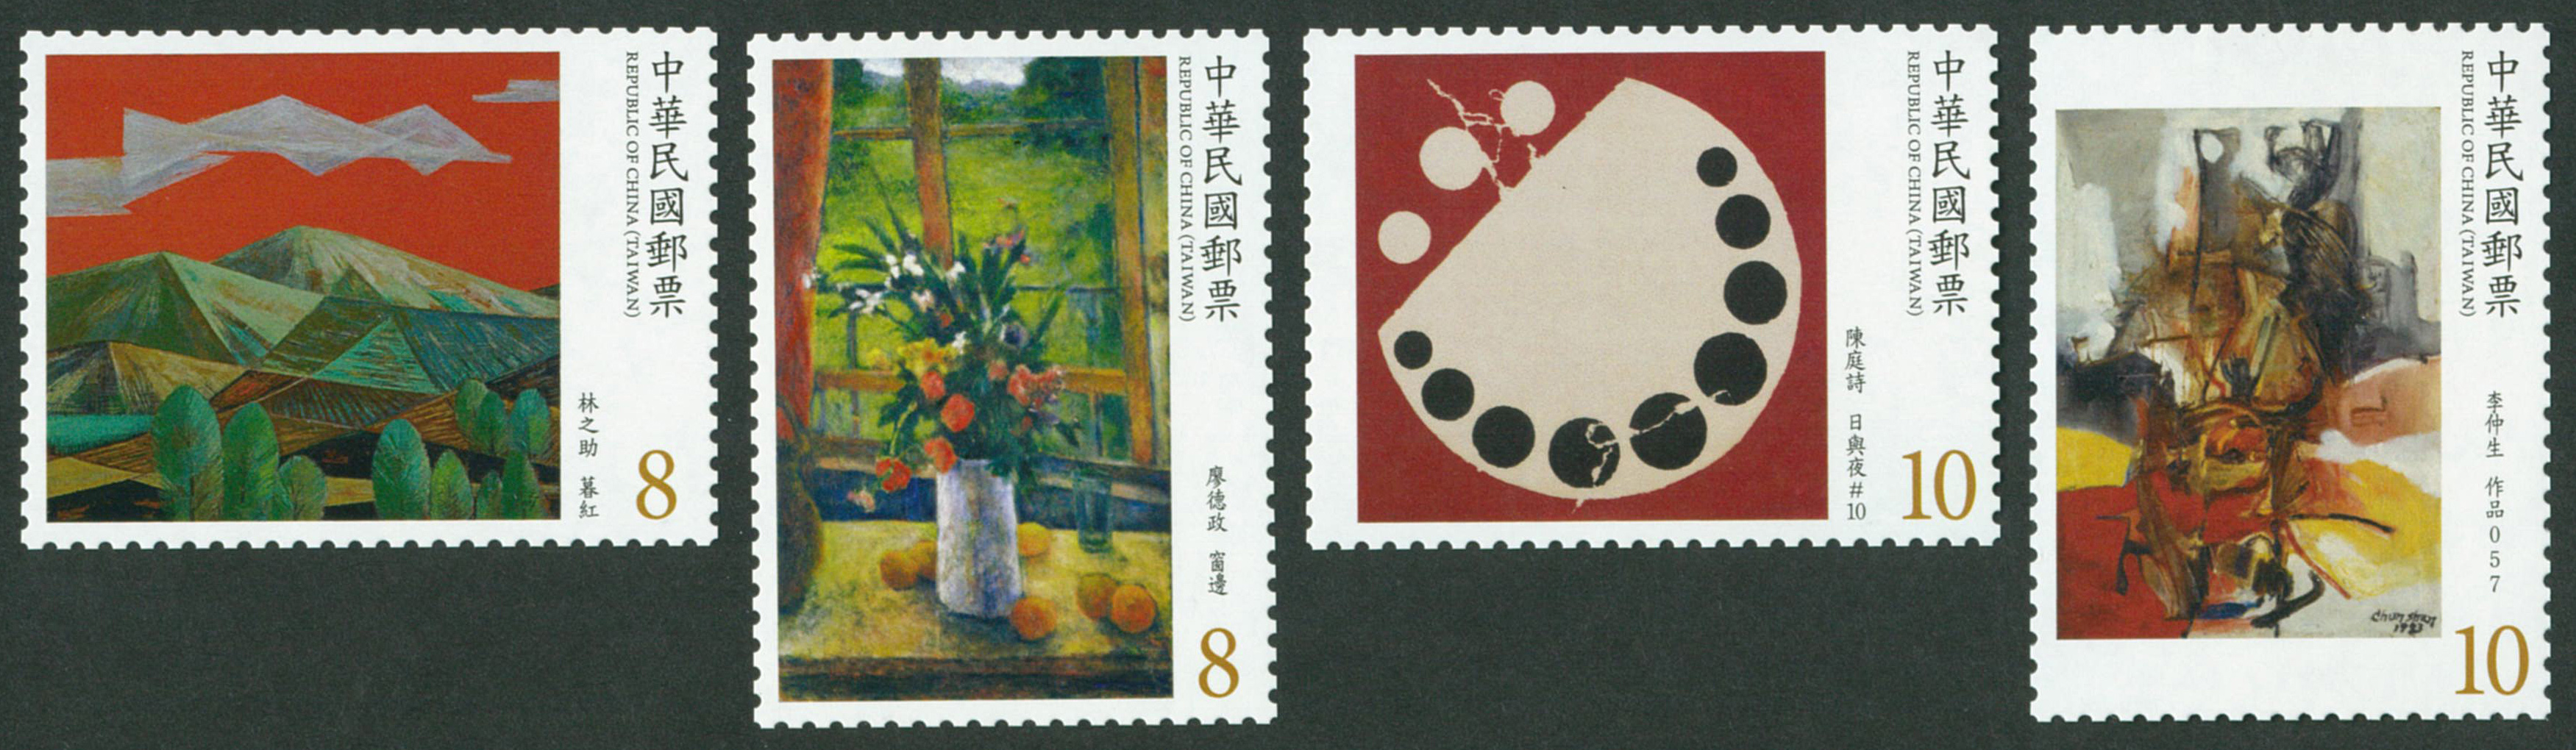 Modern Taiwanese Paintings Postage Stamps (Issue of 2018)